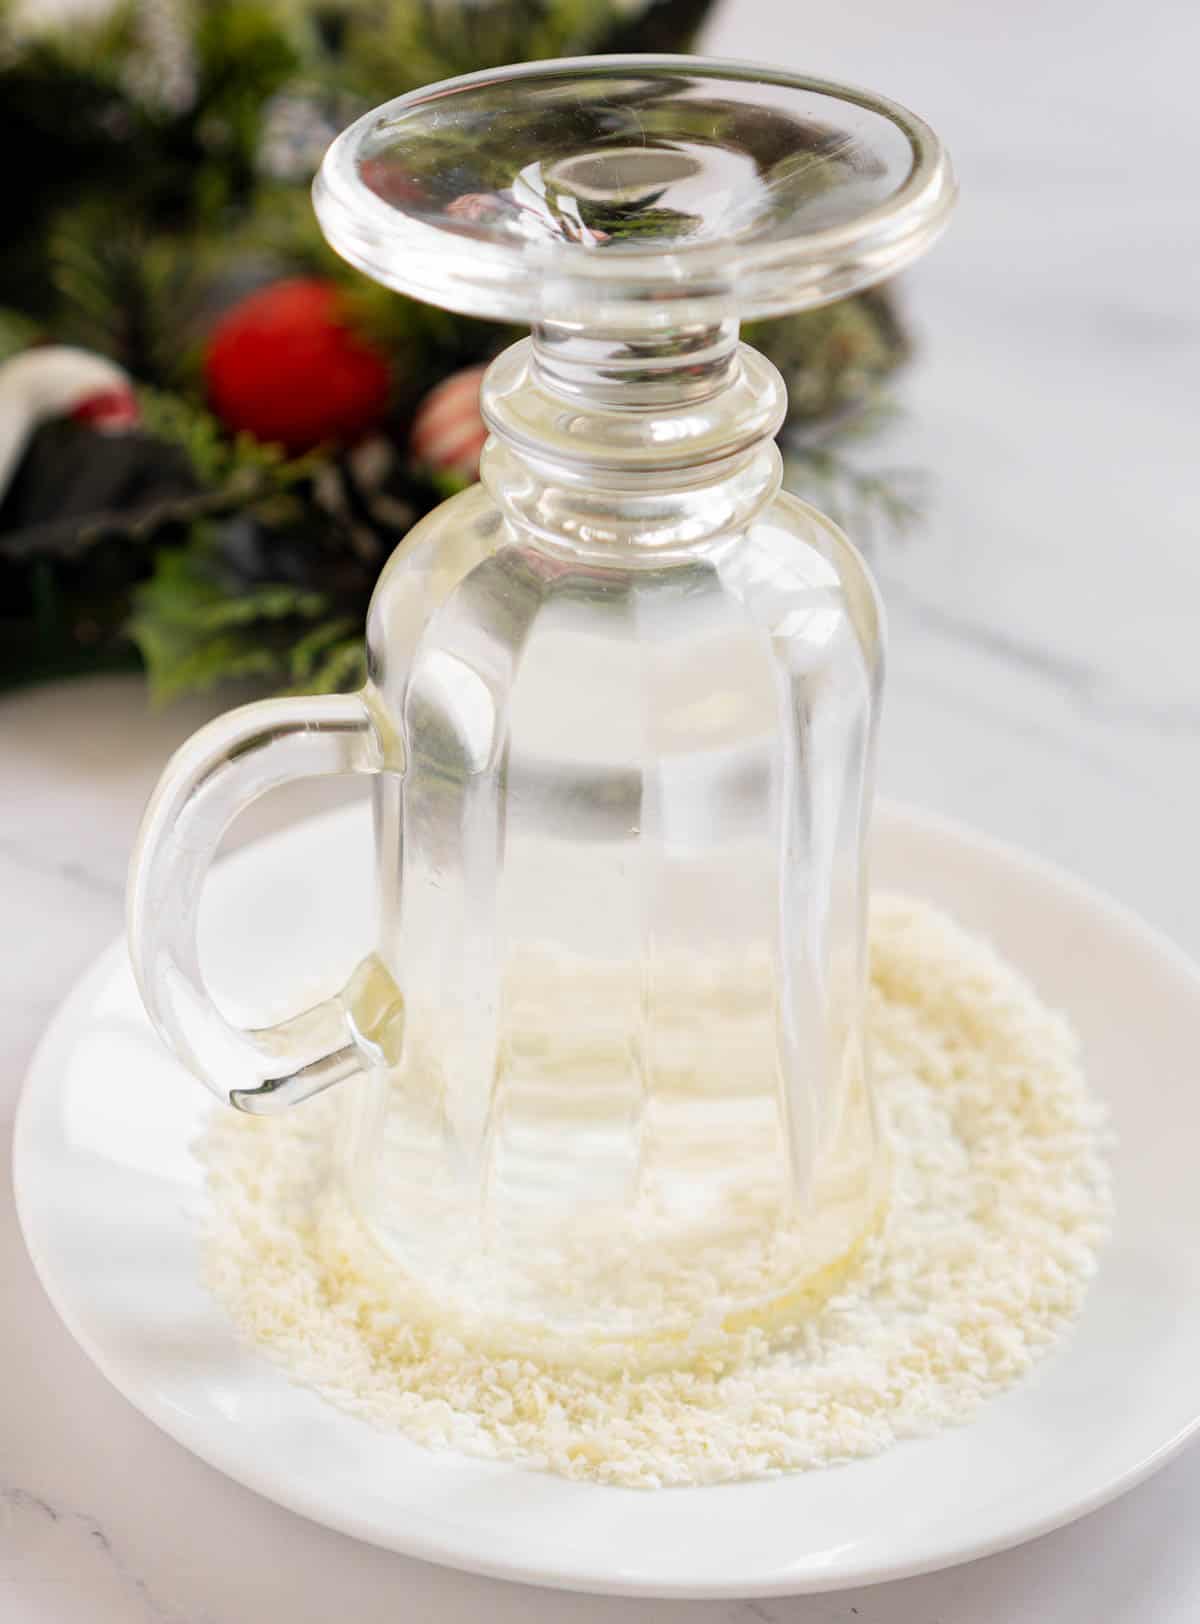 Decorating a glass with coconut "snow"